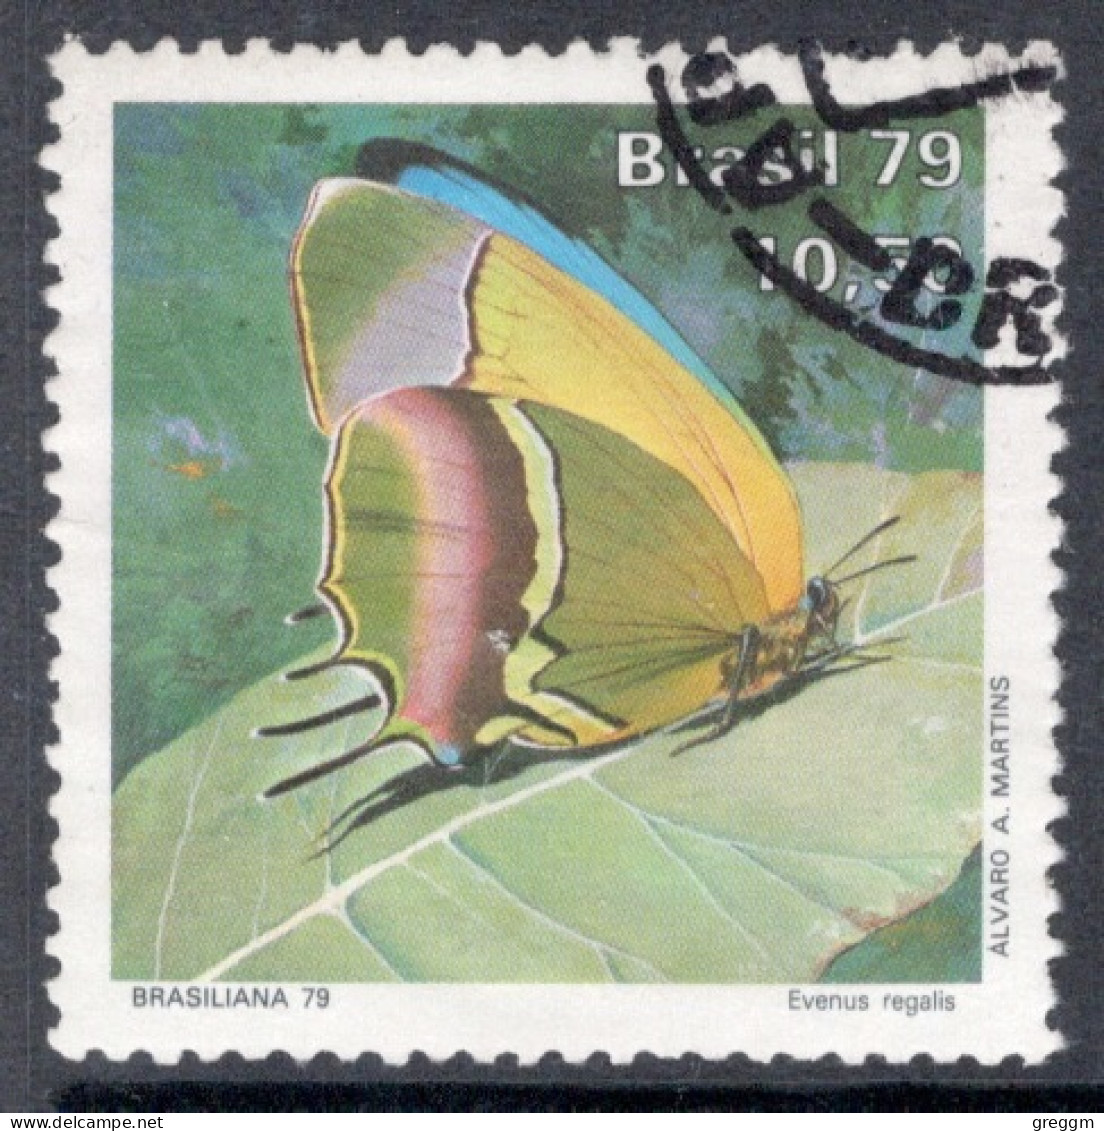 Brazil 1979 A Single Stamp International Stamp Exhibition "Brasiliana 79" - Butterflies In Fine Used - Used Stamps